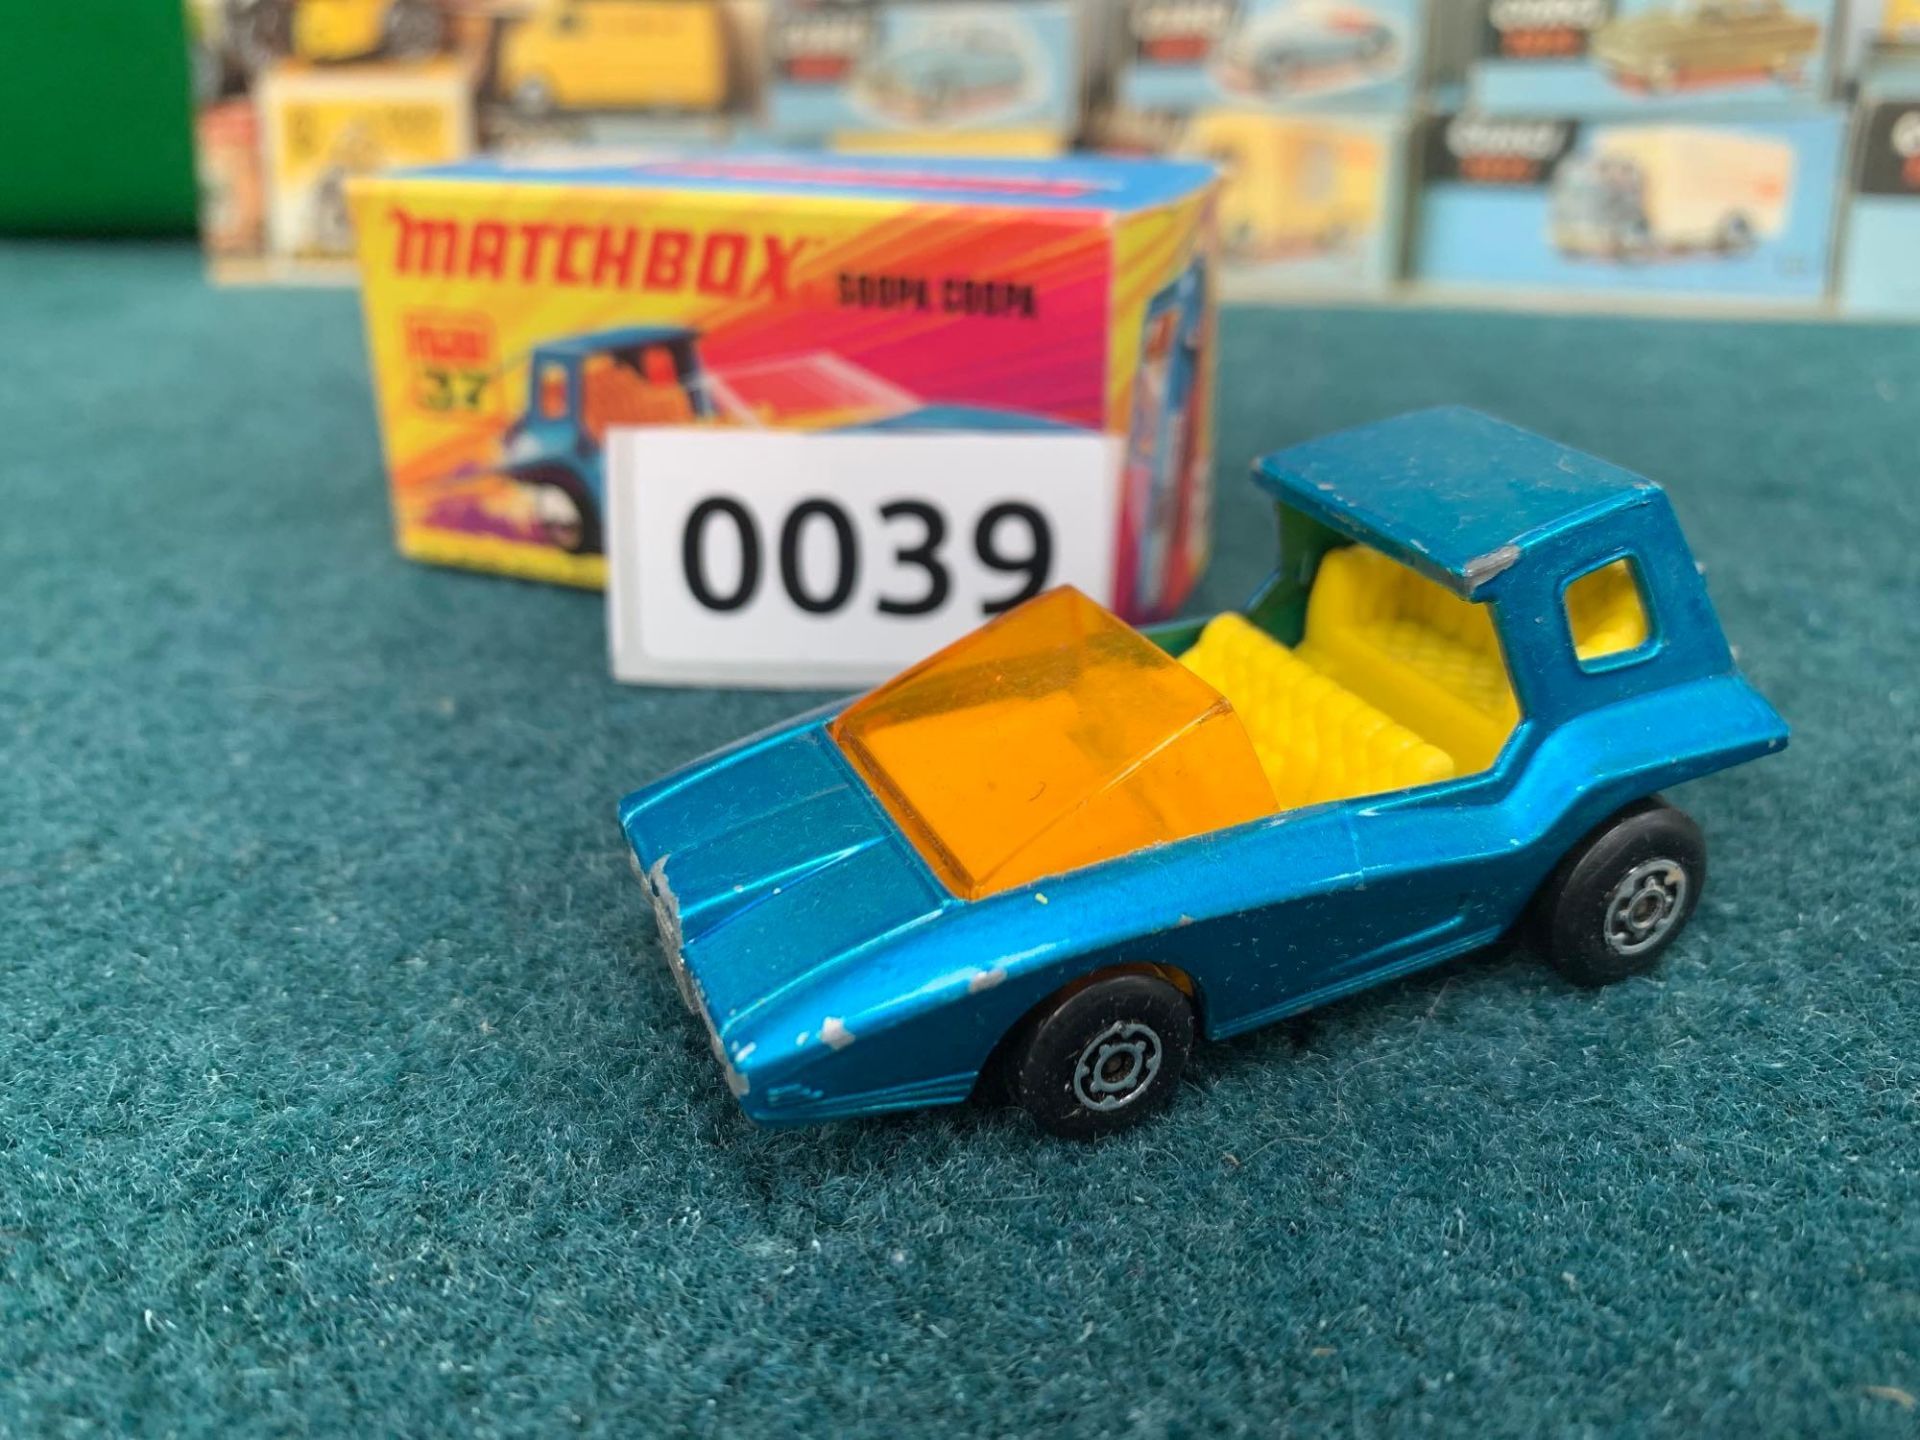 Matchbox 1972 Lesney Superfast Diecast Toy Car Soopa Coopa No. 37 - Image 2 of 4